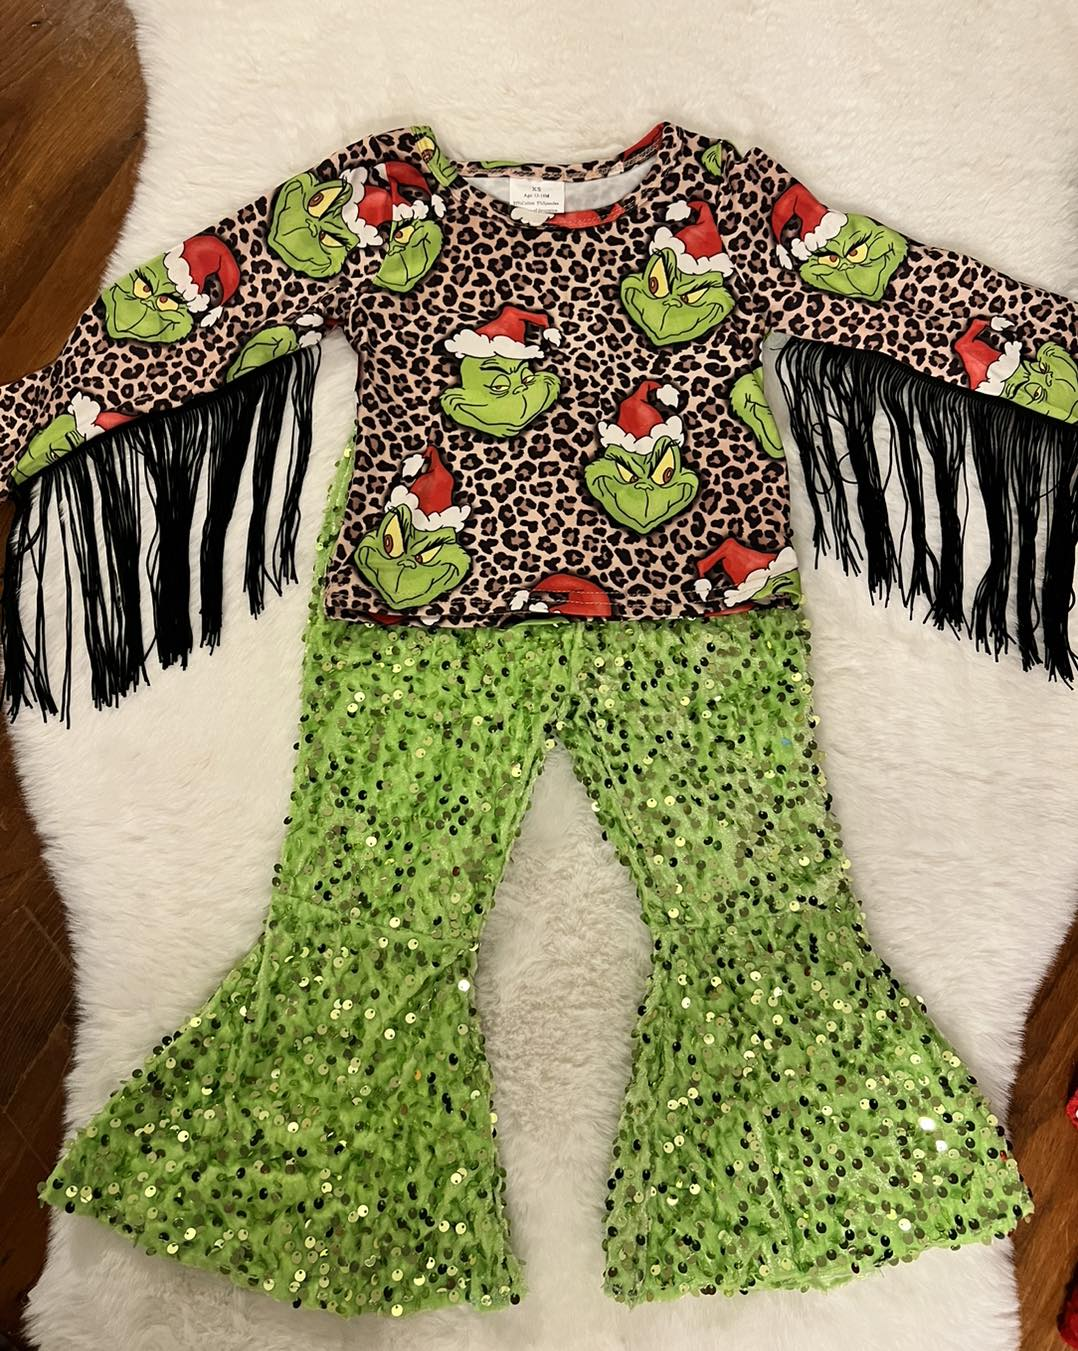 Toddle girls green face  Merry Christmas top matching sequins pants outfit